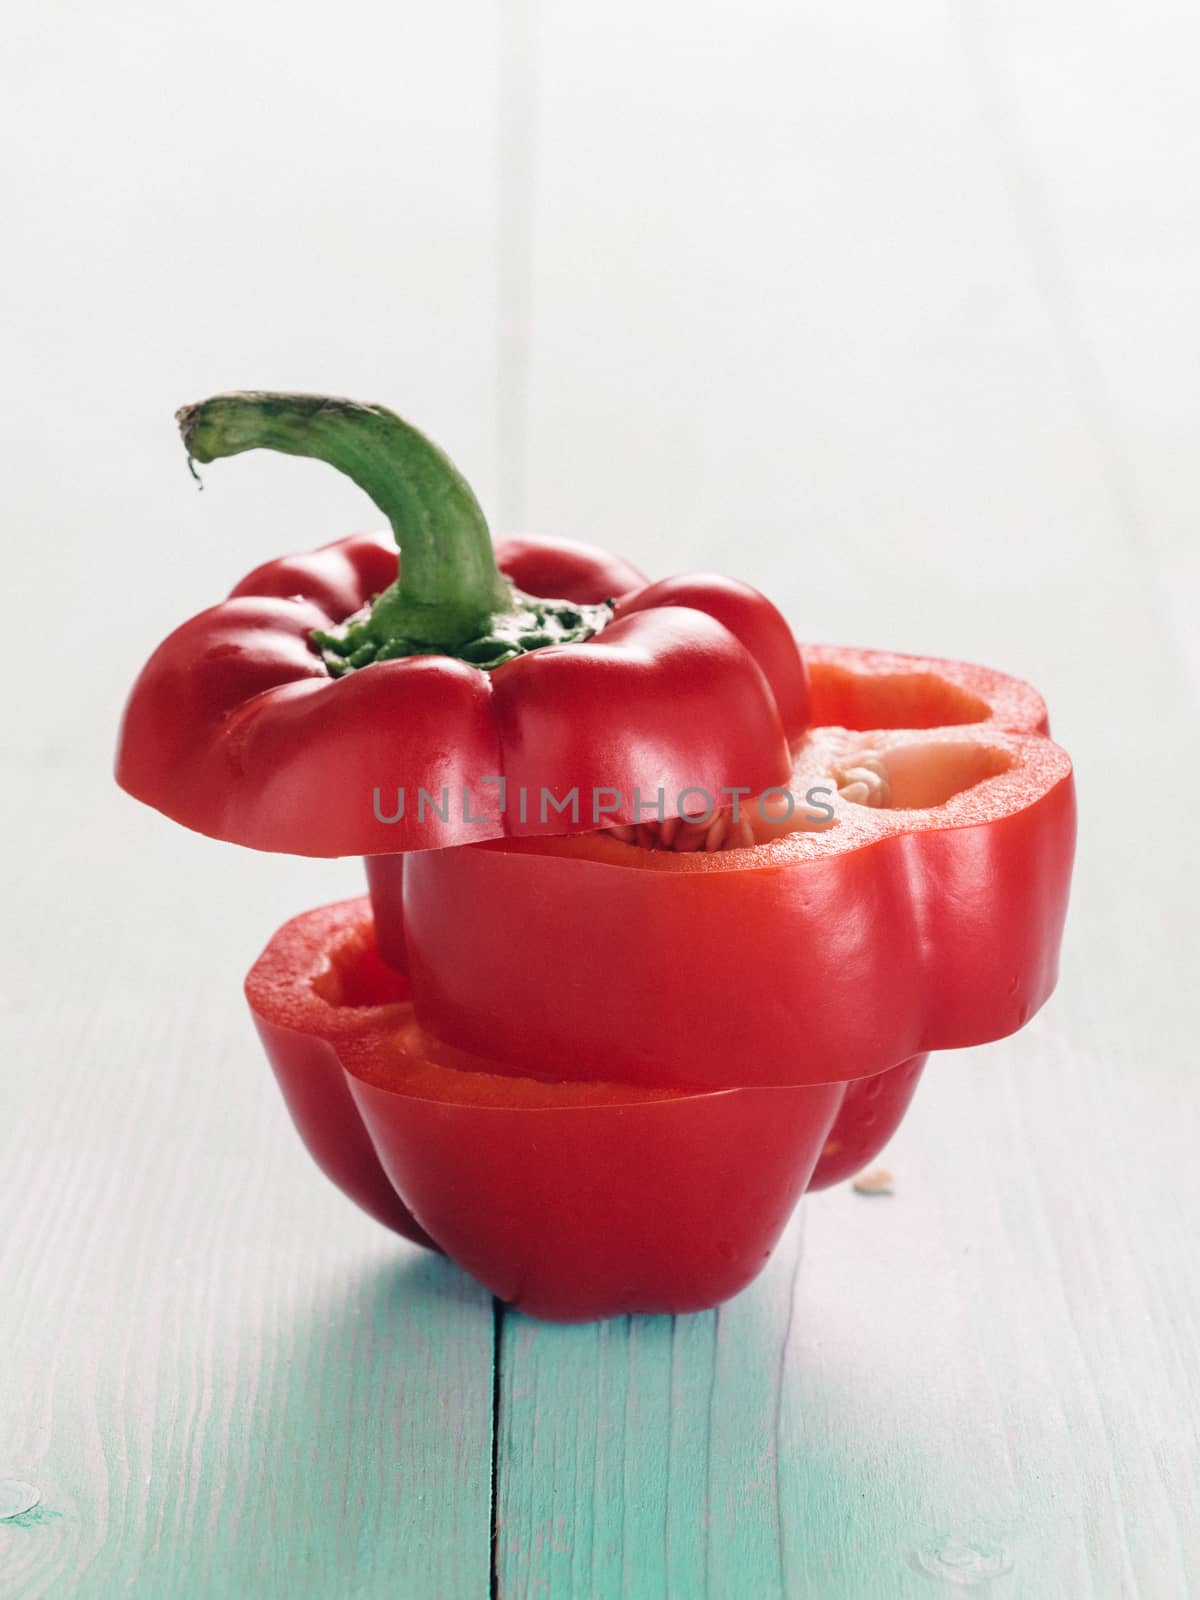 Sweet red peppers sliced on blue wooden background. Copy space. Vertical.